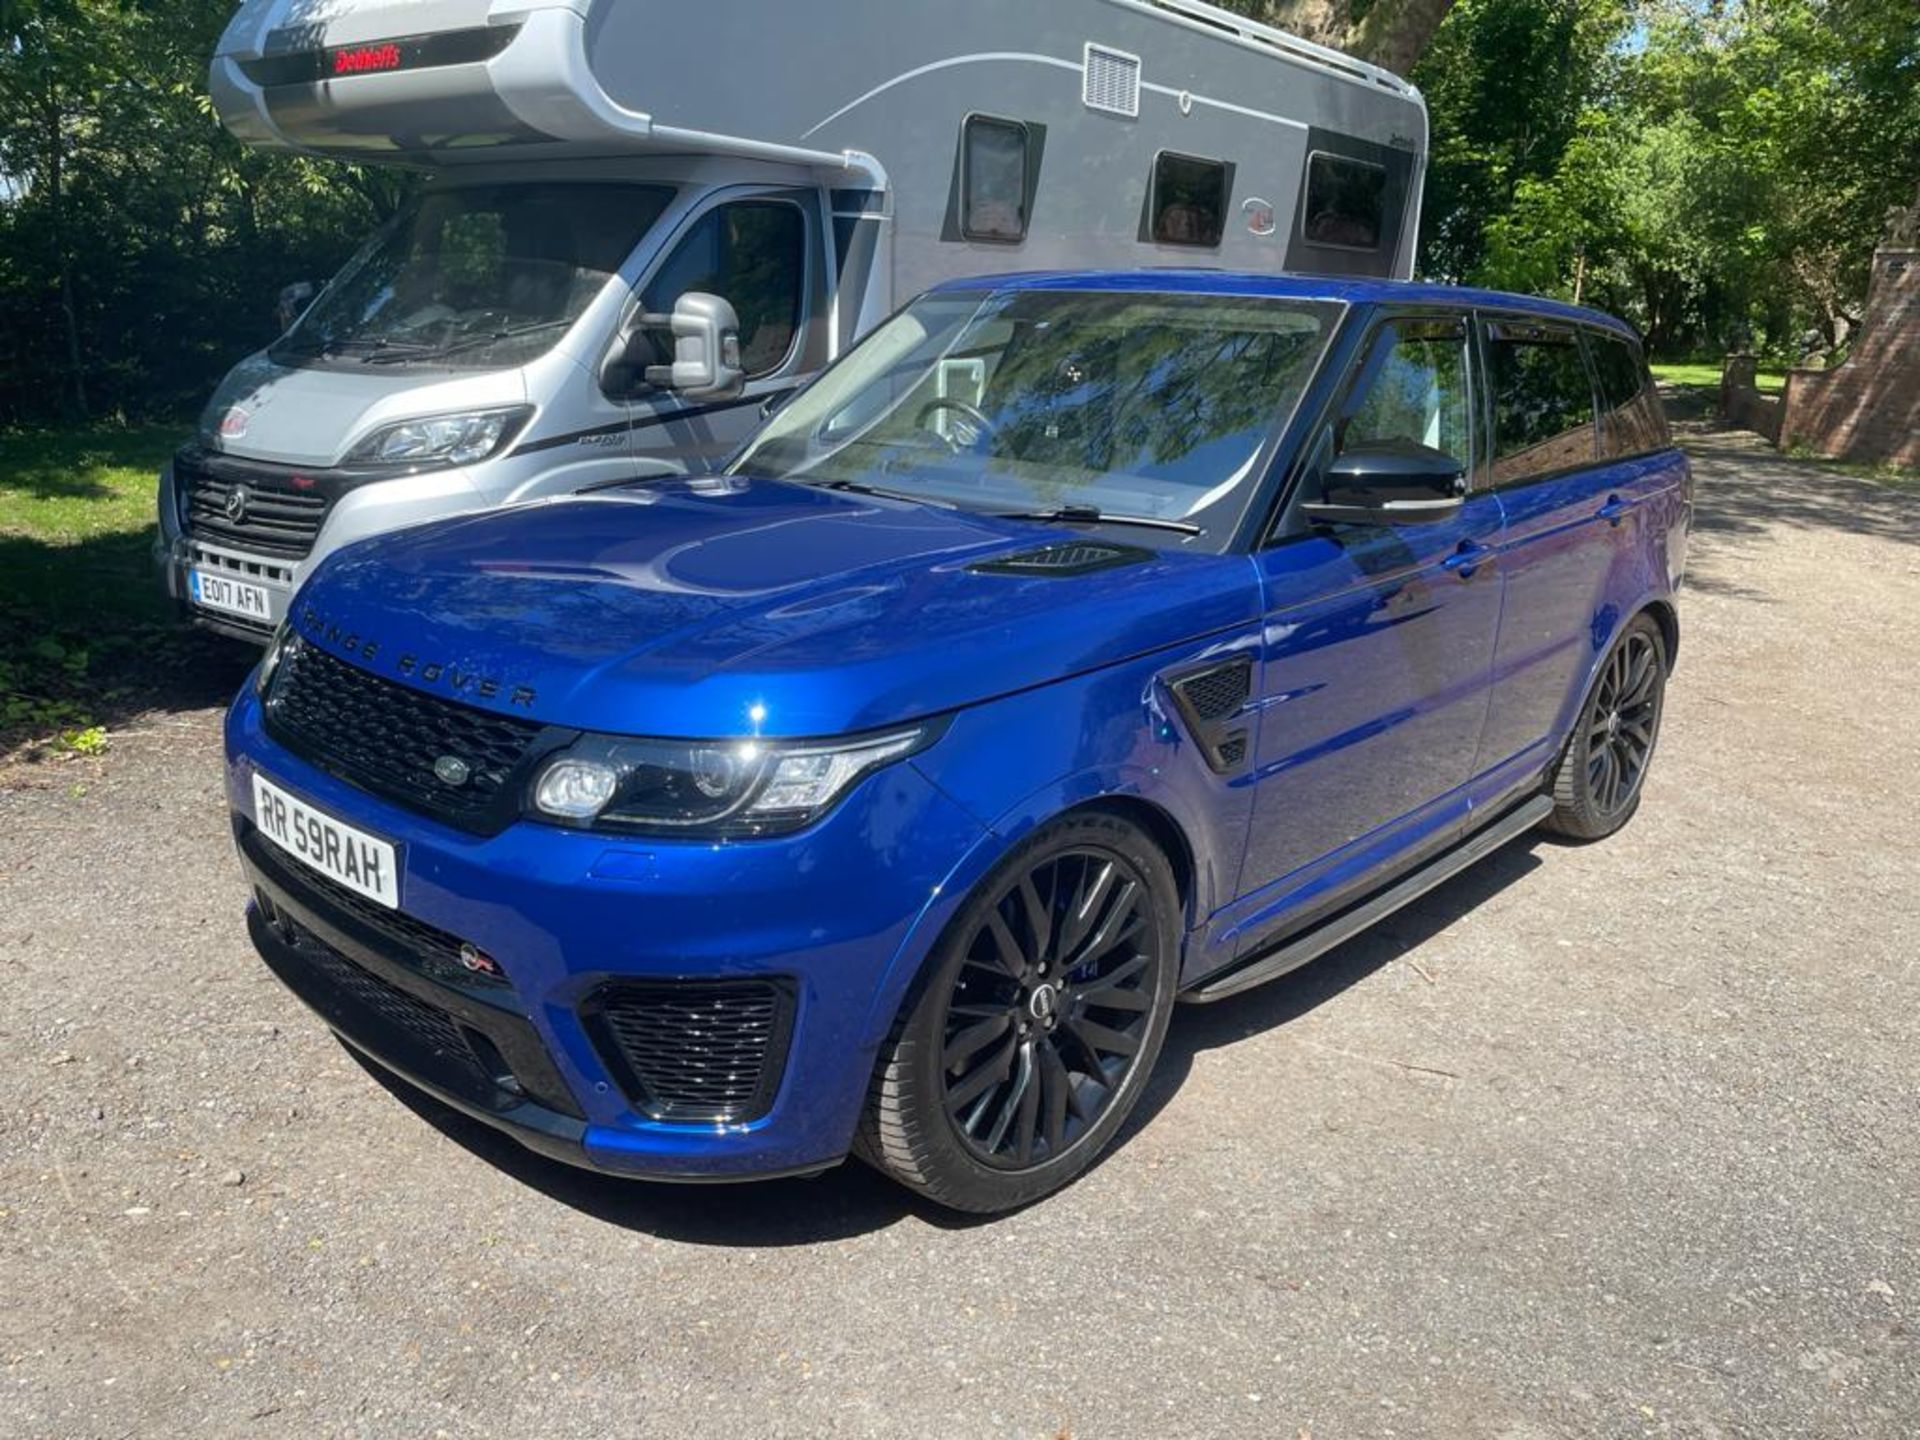 2016 RANGE ROVER SPORT SVR AUTOBIOGRAPHY DYNAMIC V8 SUPERCHARGED AUTOMATIC 5.0 550PS PETROL ENGINE - Image 3 of 28